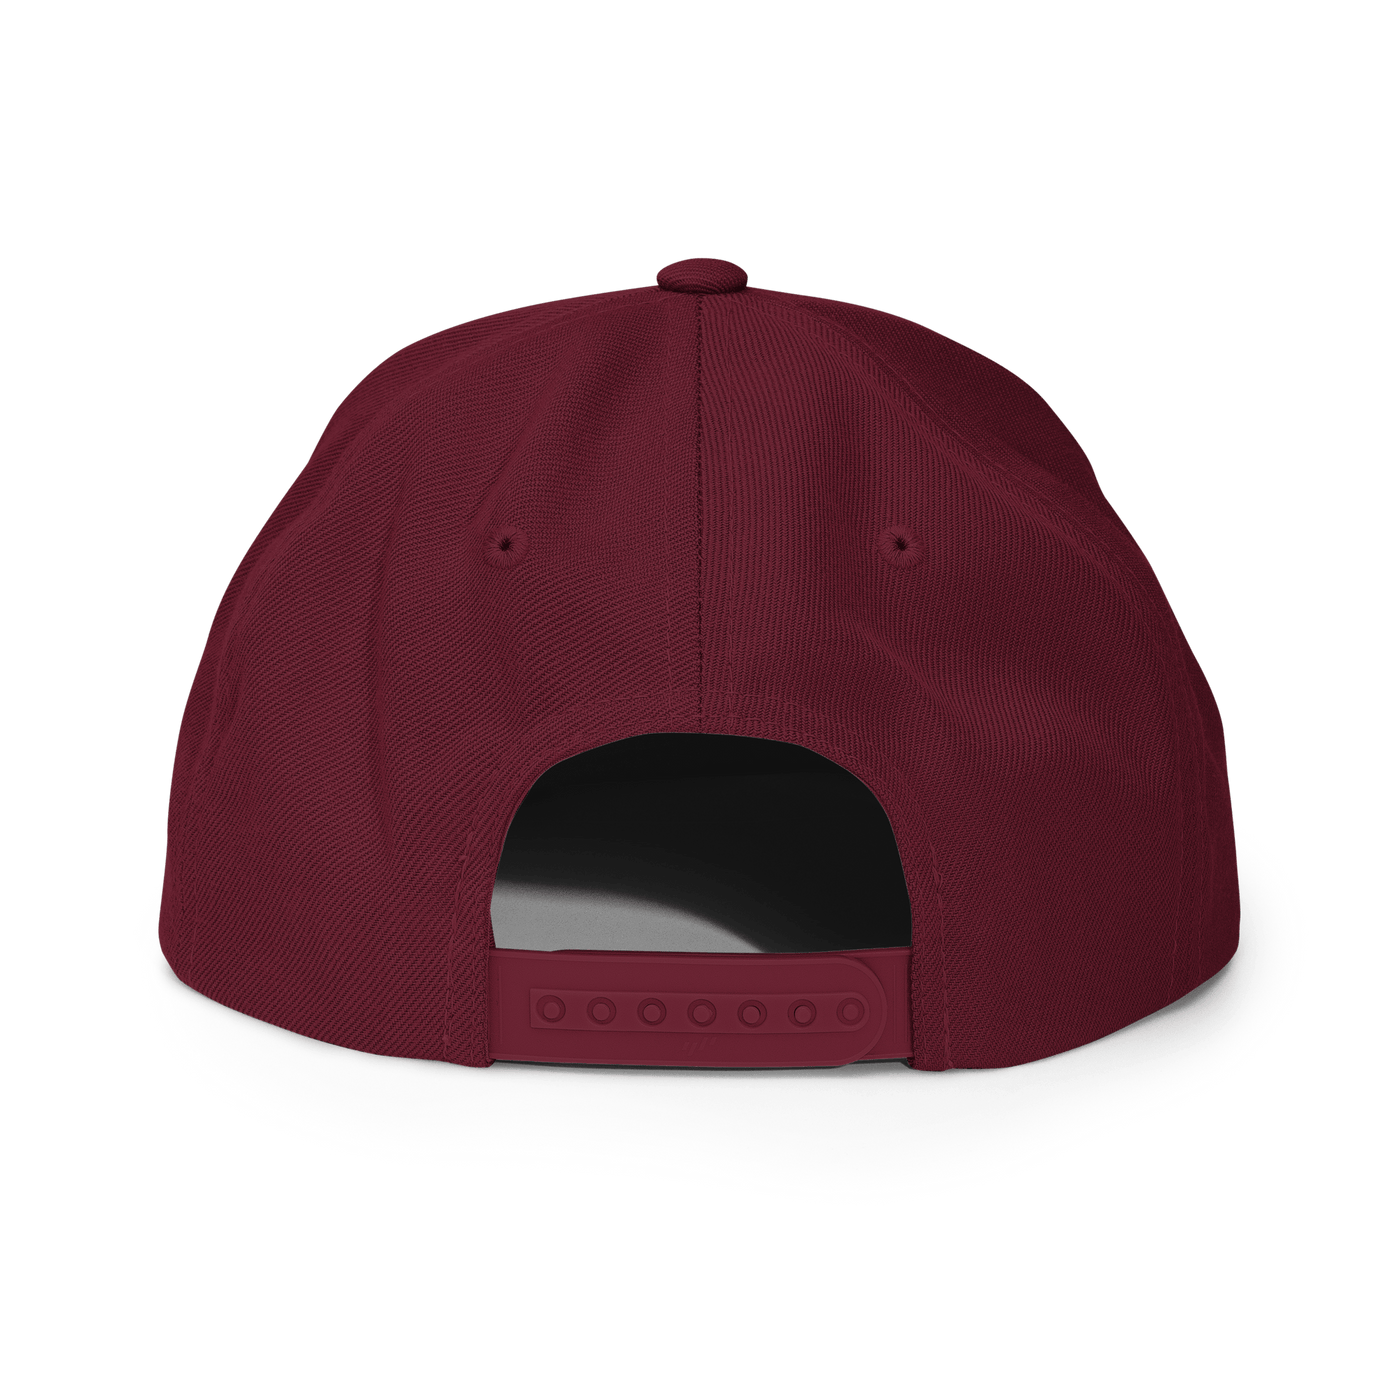 I don't work here Snapback Hat - Maroon - - Just Another Cap Store